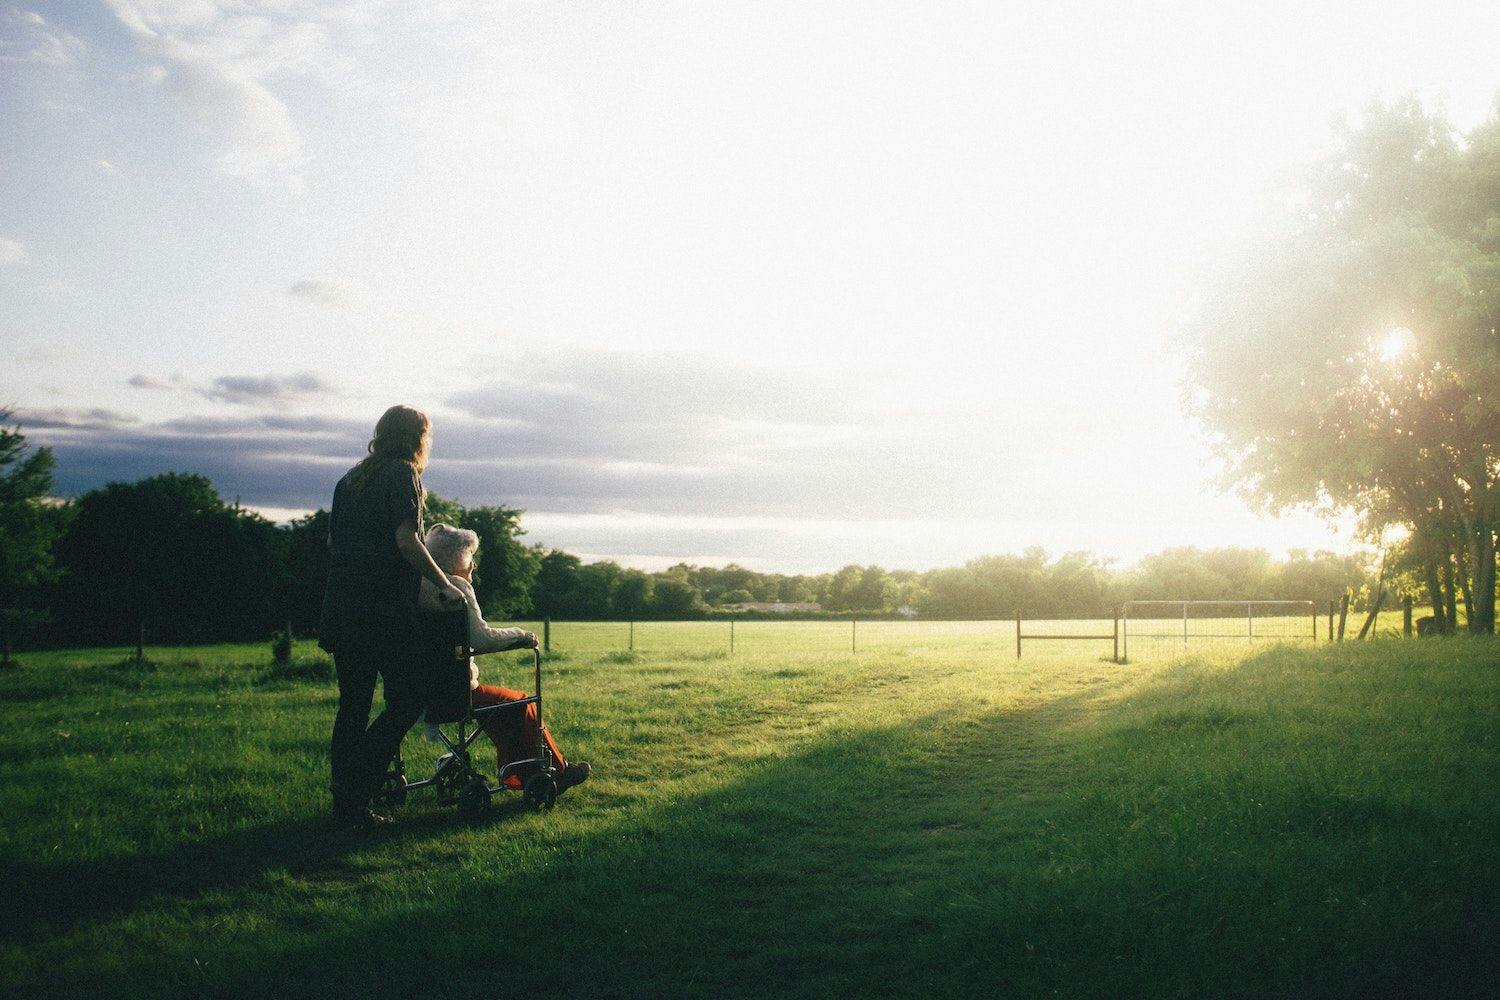 Image shows a carer and person looking out across a field. 